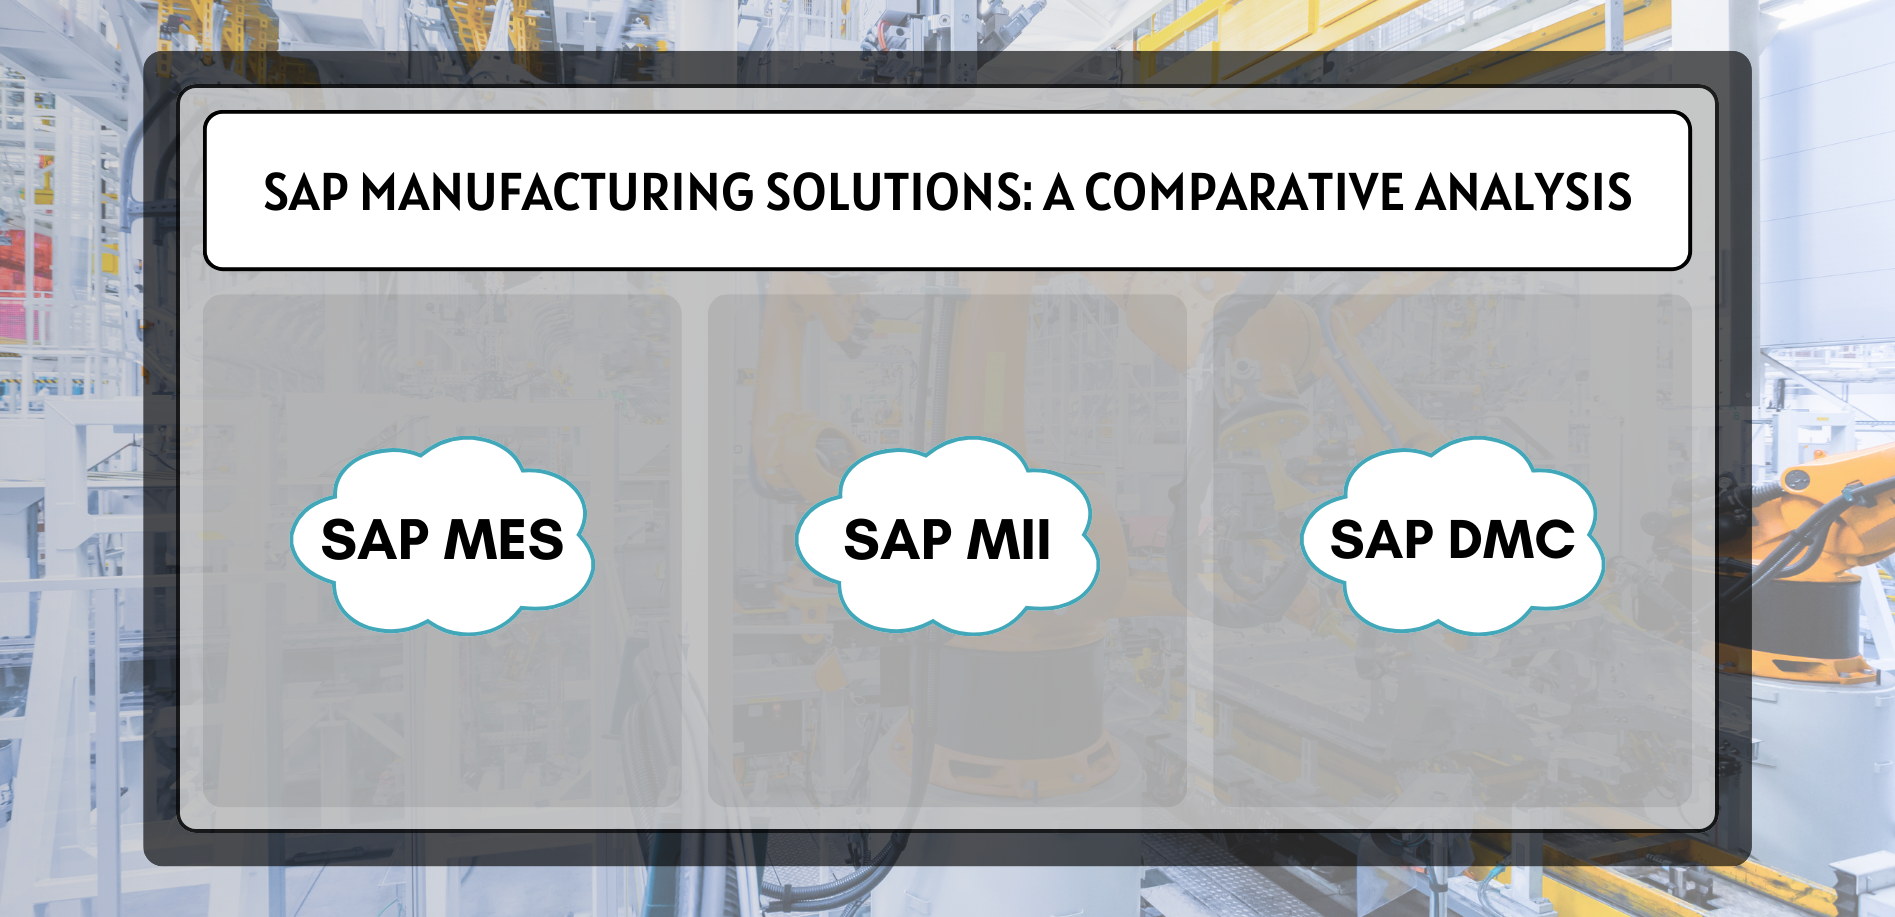 SAP Manufacturing Solutions: A Comparative Analysis